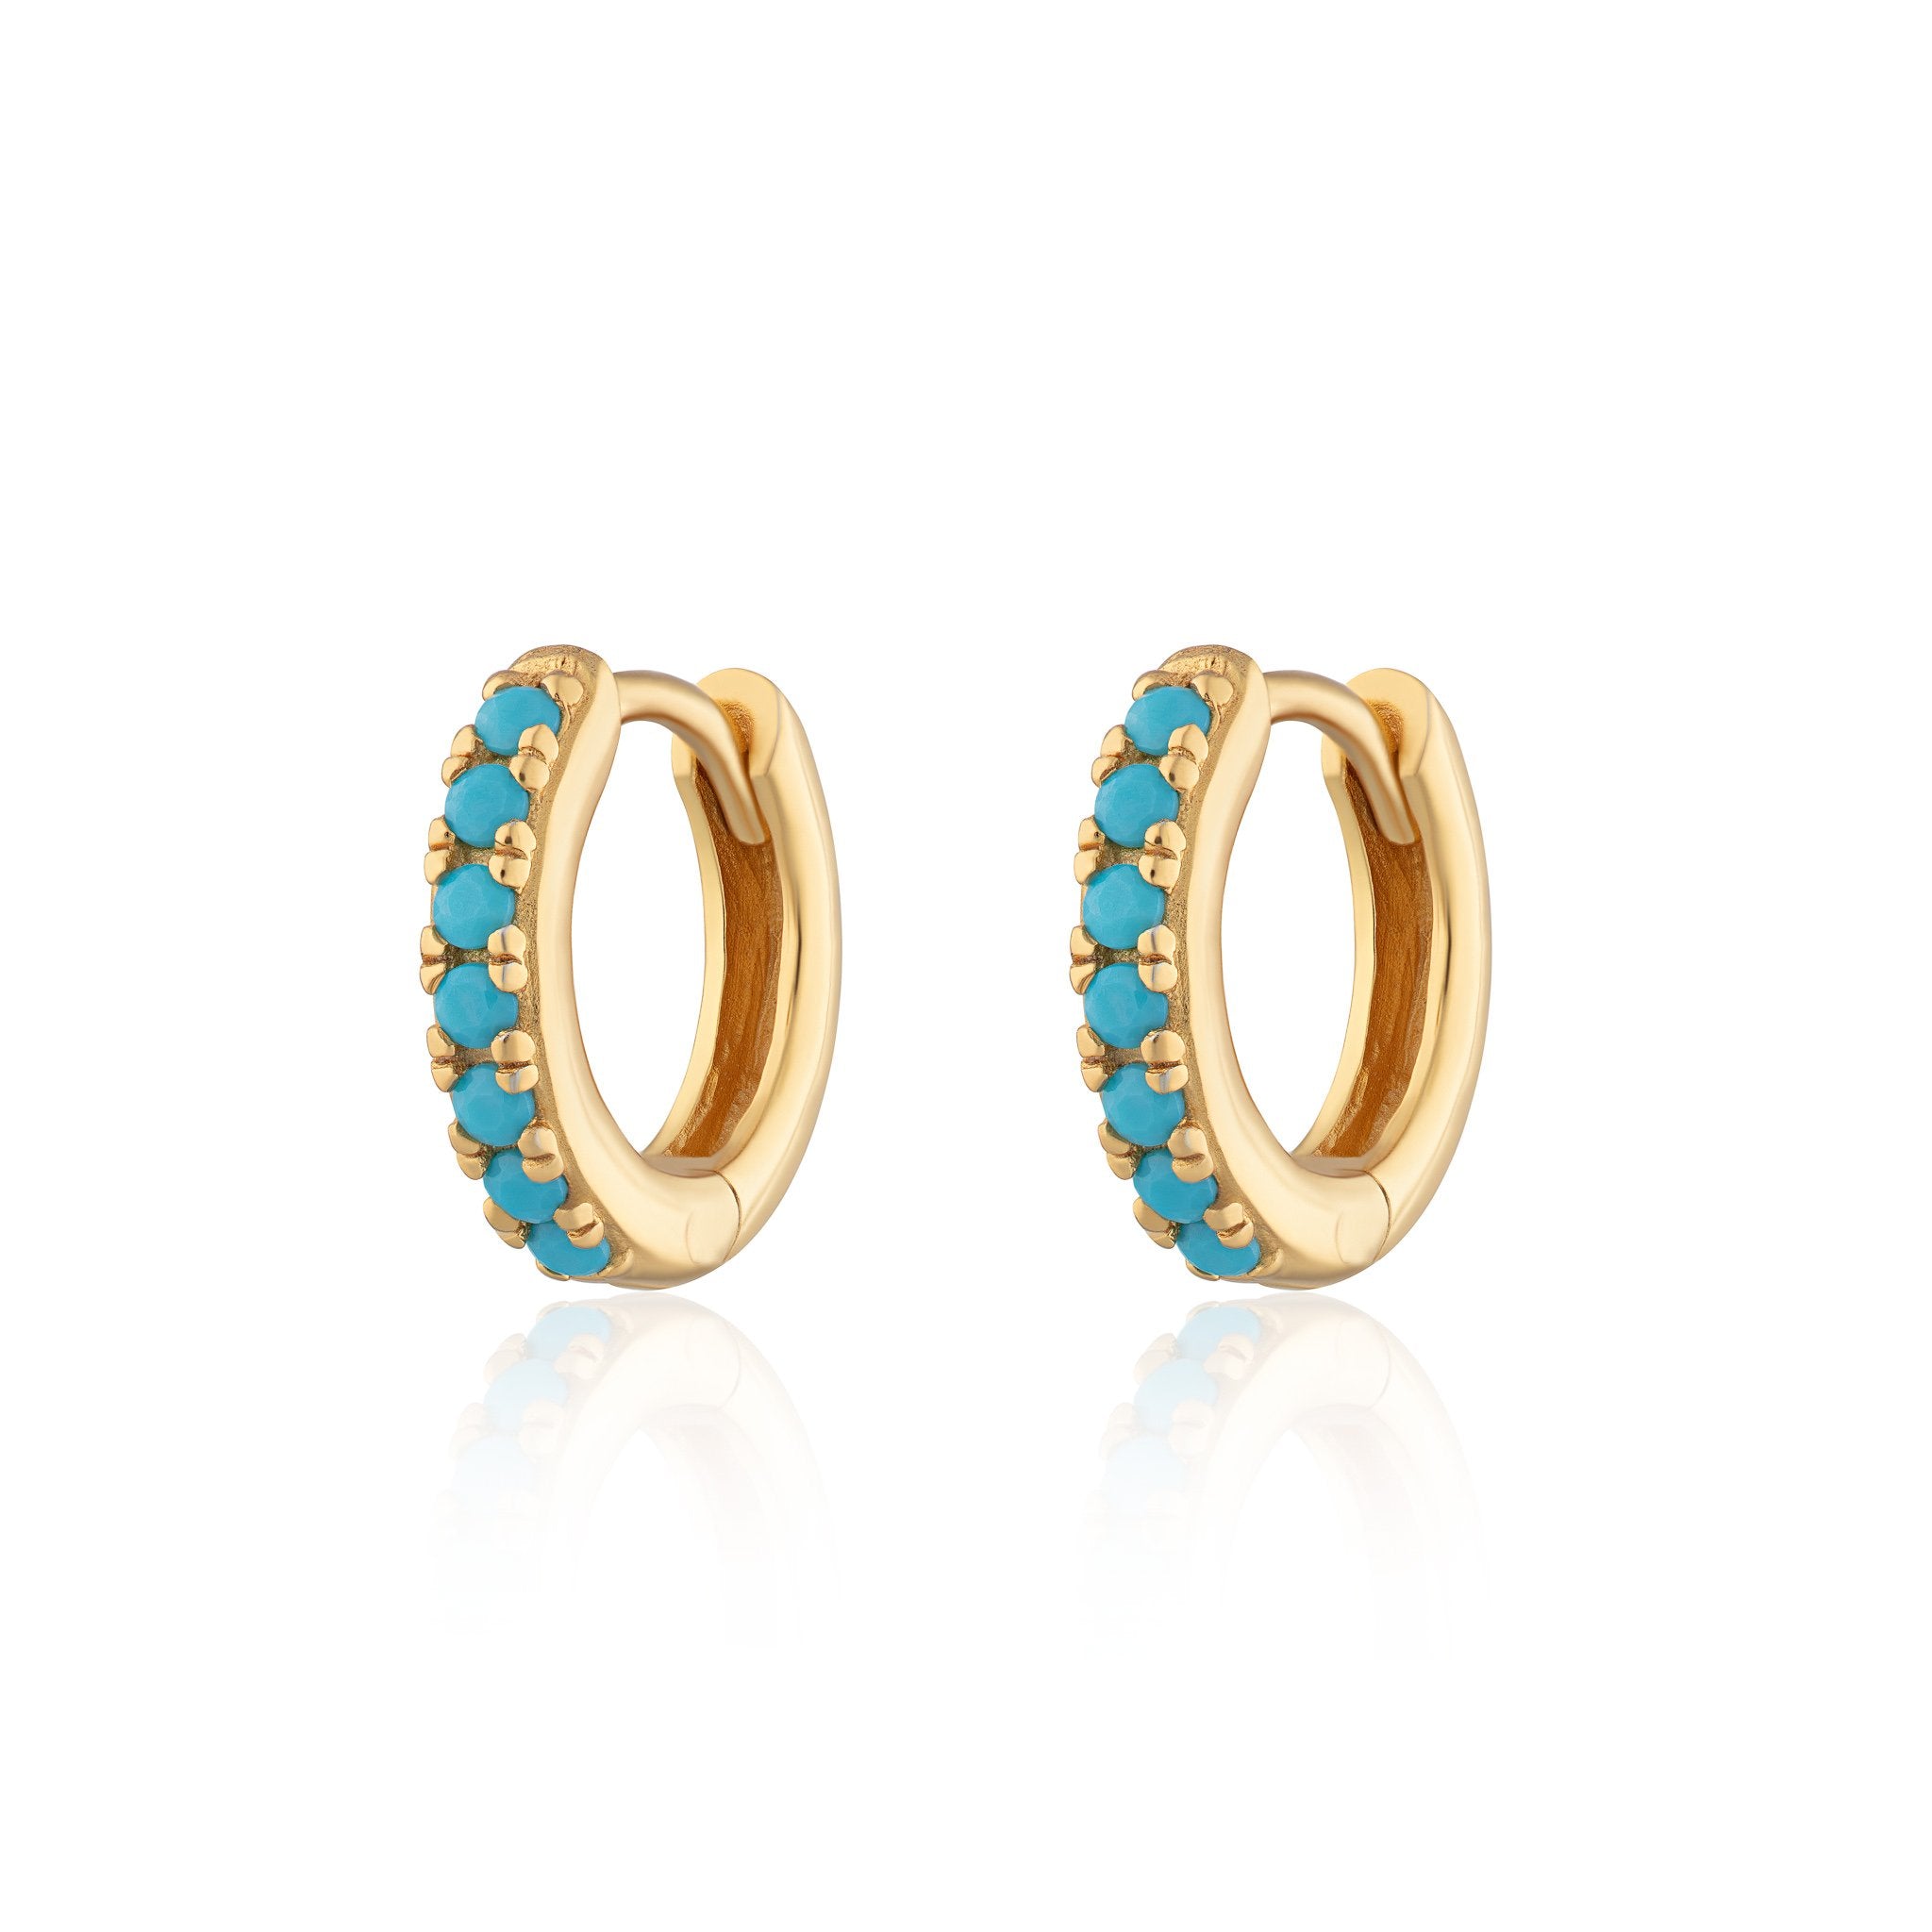 Huggie Earrings With Turquoise Stones Gold Plated earrings by Scream Pretty